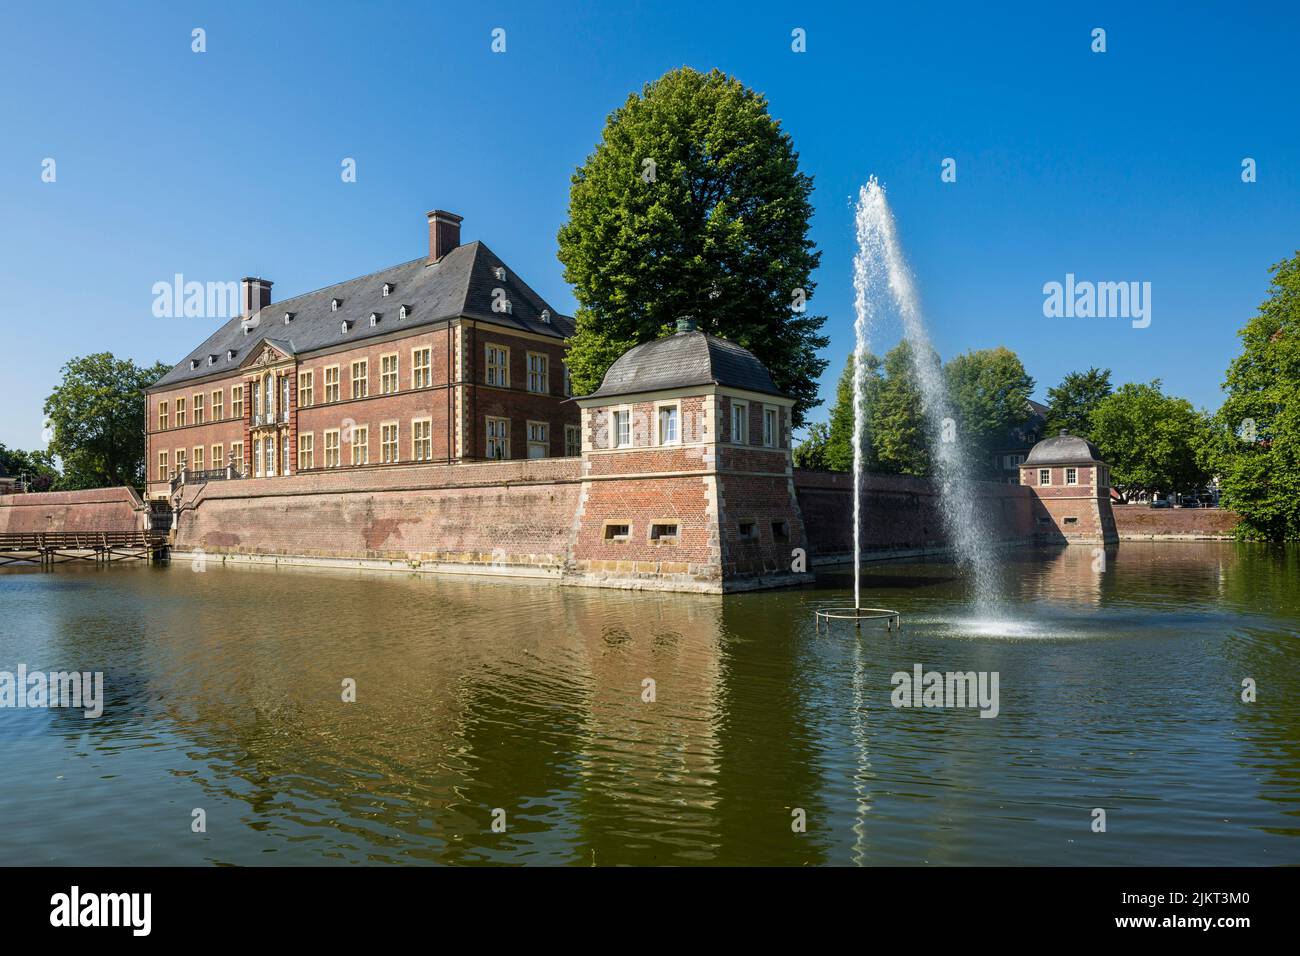 Germany, Ahaus, Westmuensterland, Muensterland, Westphalia, North Rhine-Westphalia, NRW, Ahaus Castle, former residence, nowadays seat of the Technical Academy of Ahaus, moated castle, baroque, water fountain Stock Photo